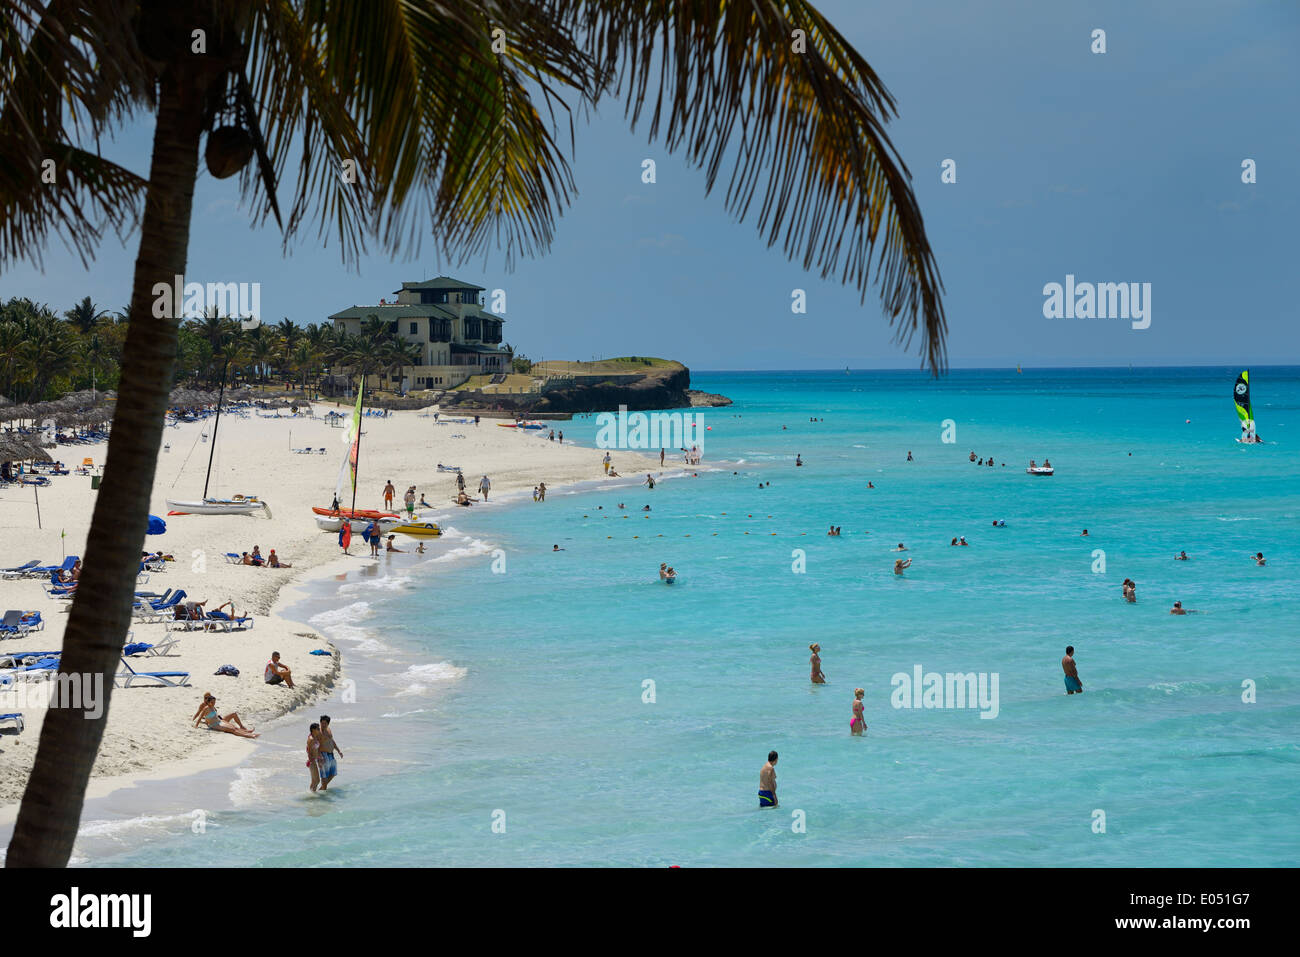 Coconut palm tree and Xanadu mansion at white sand beach of Varadero resort Cuba with tourists in turquoise water of the Atlantic Ocean Stock Photo